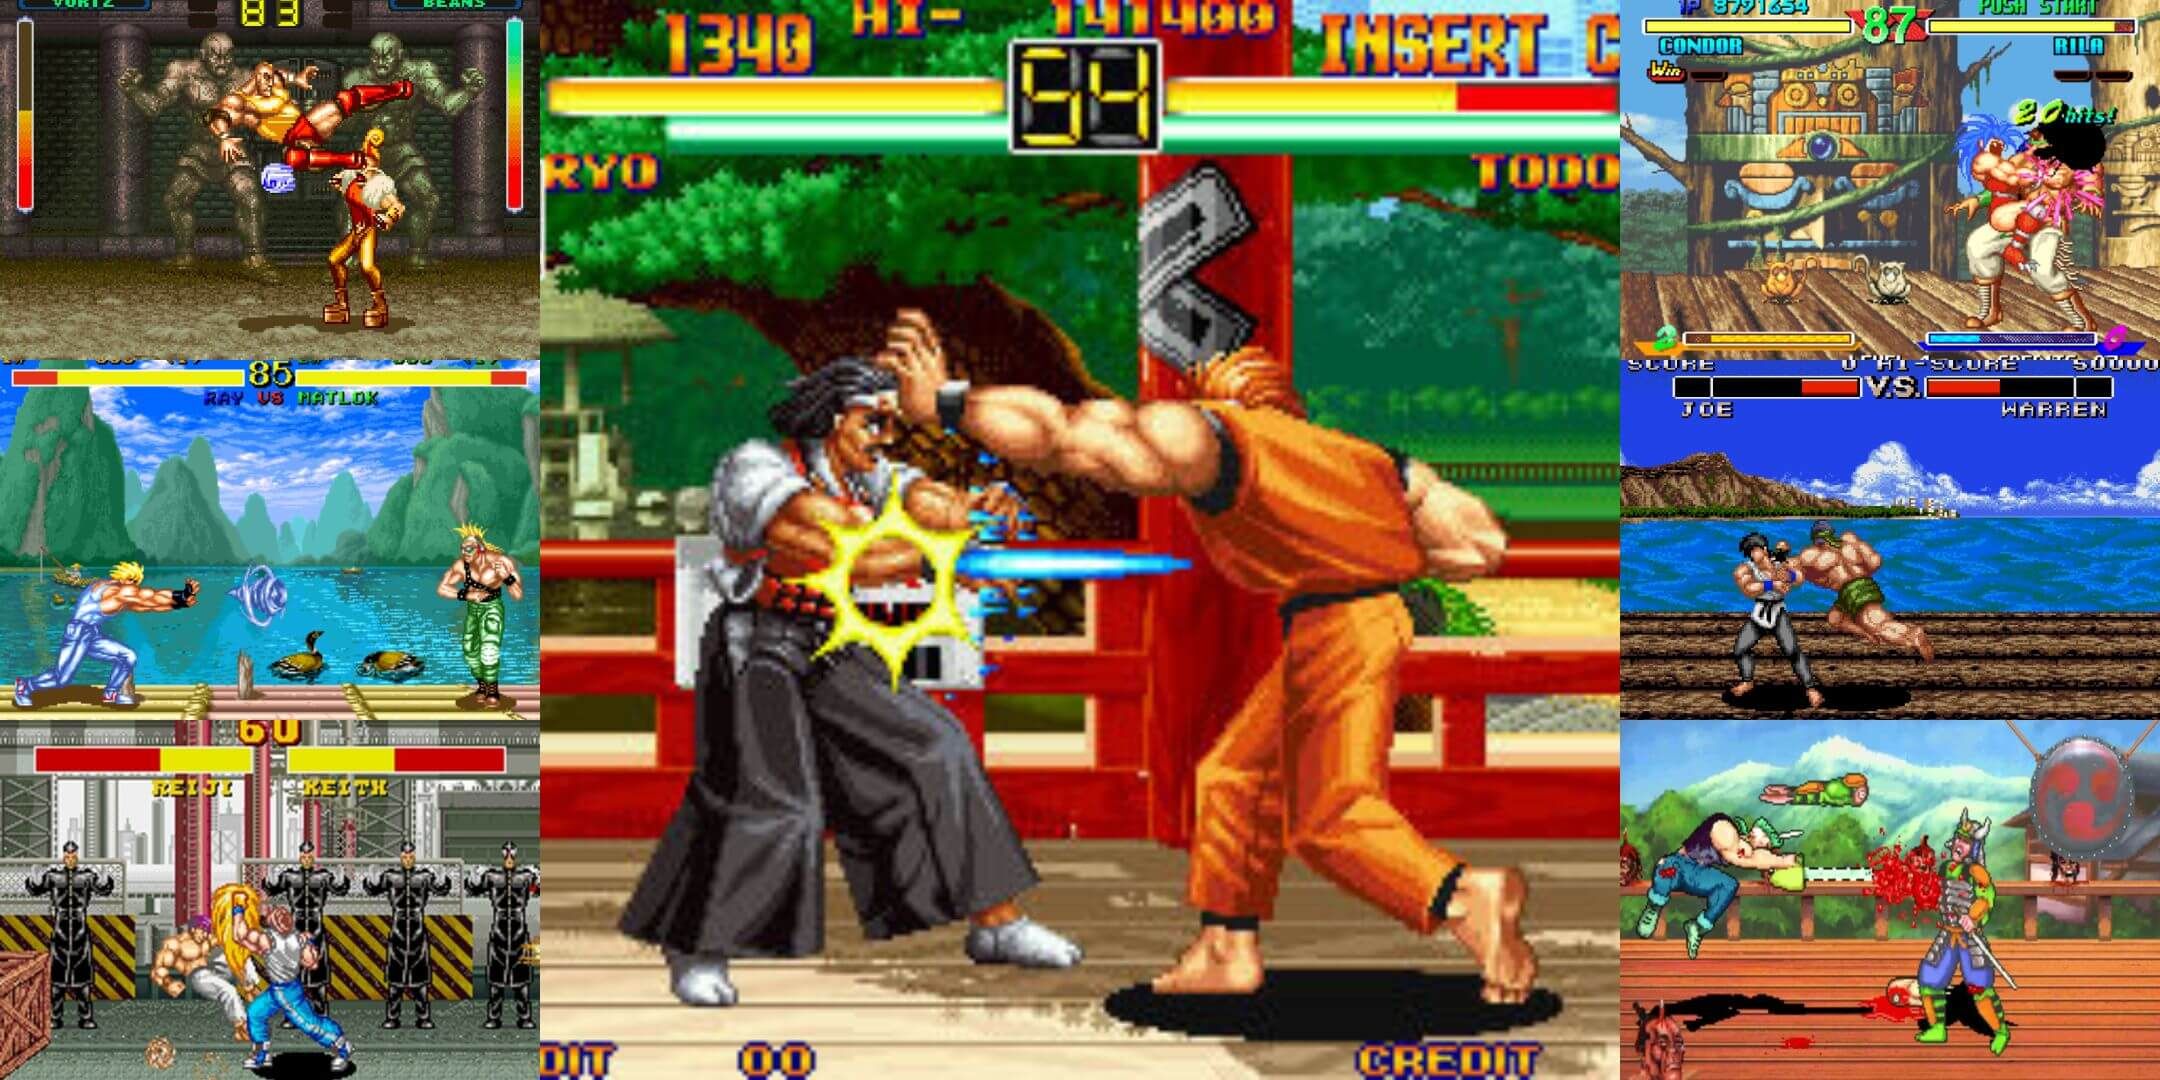 Top Street Fighter Clone Games